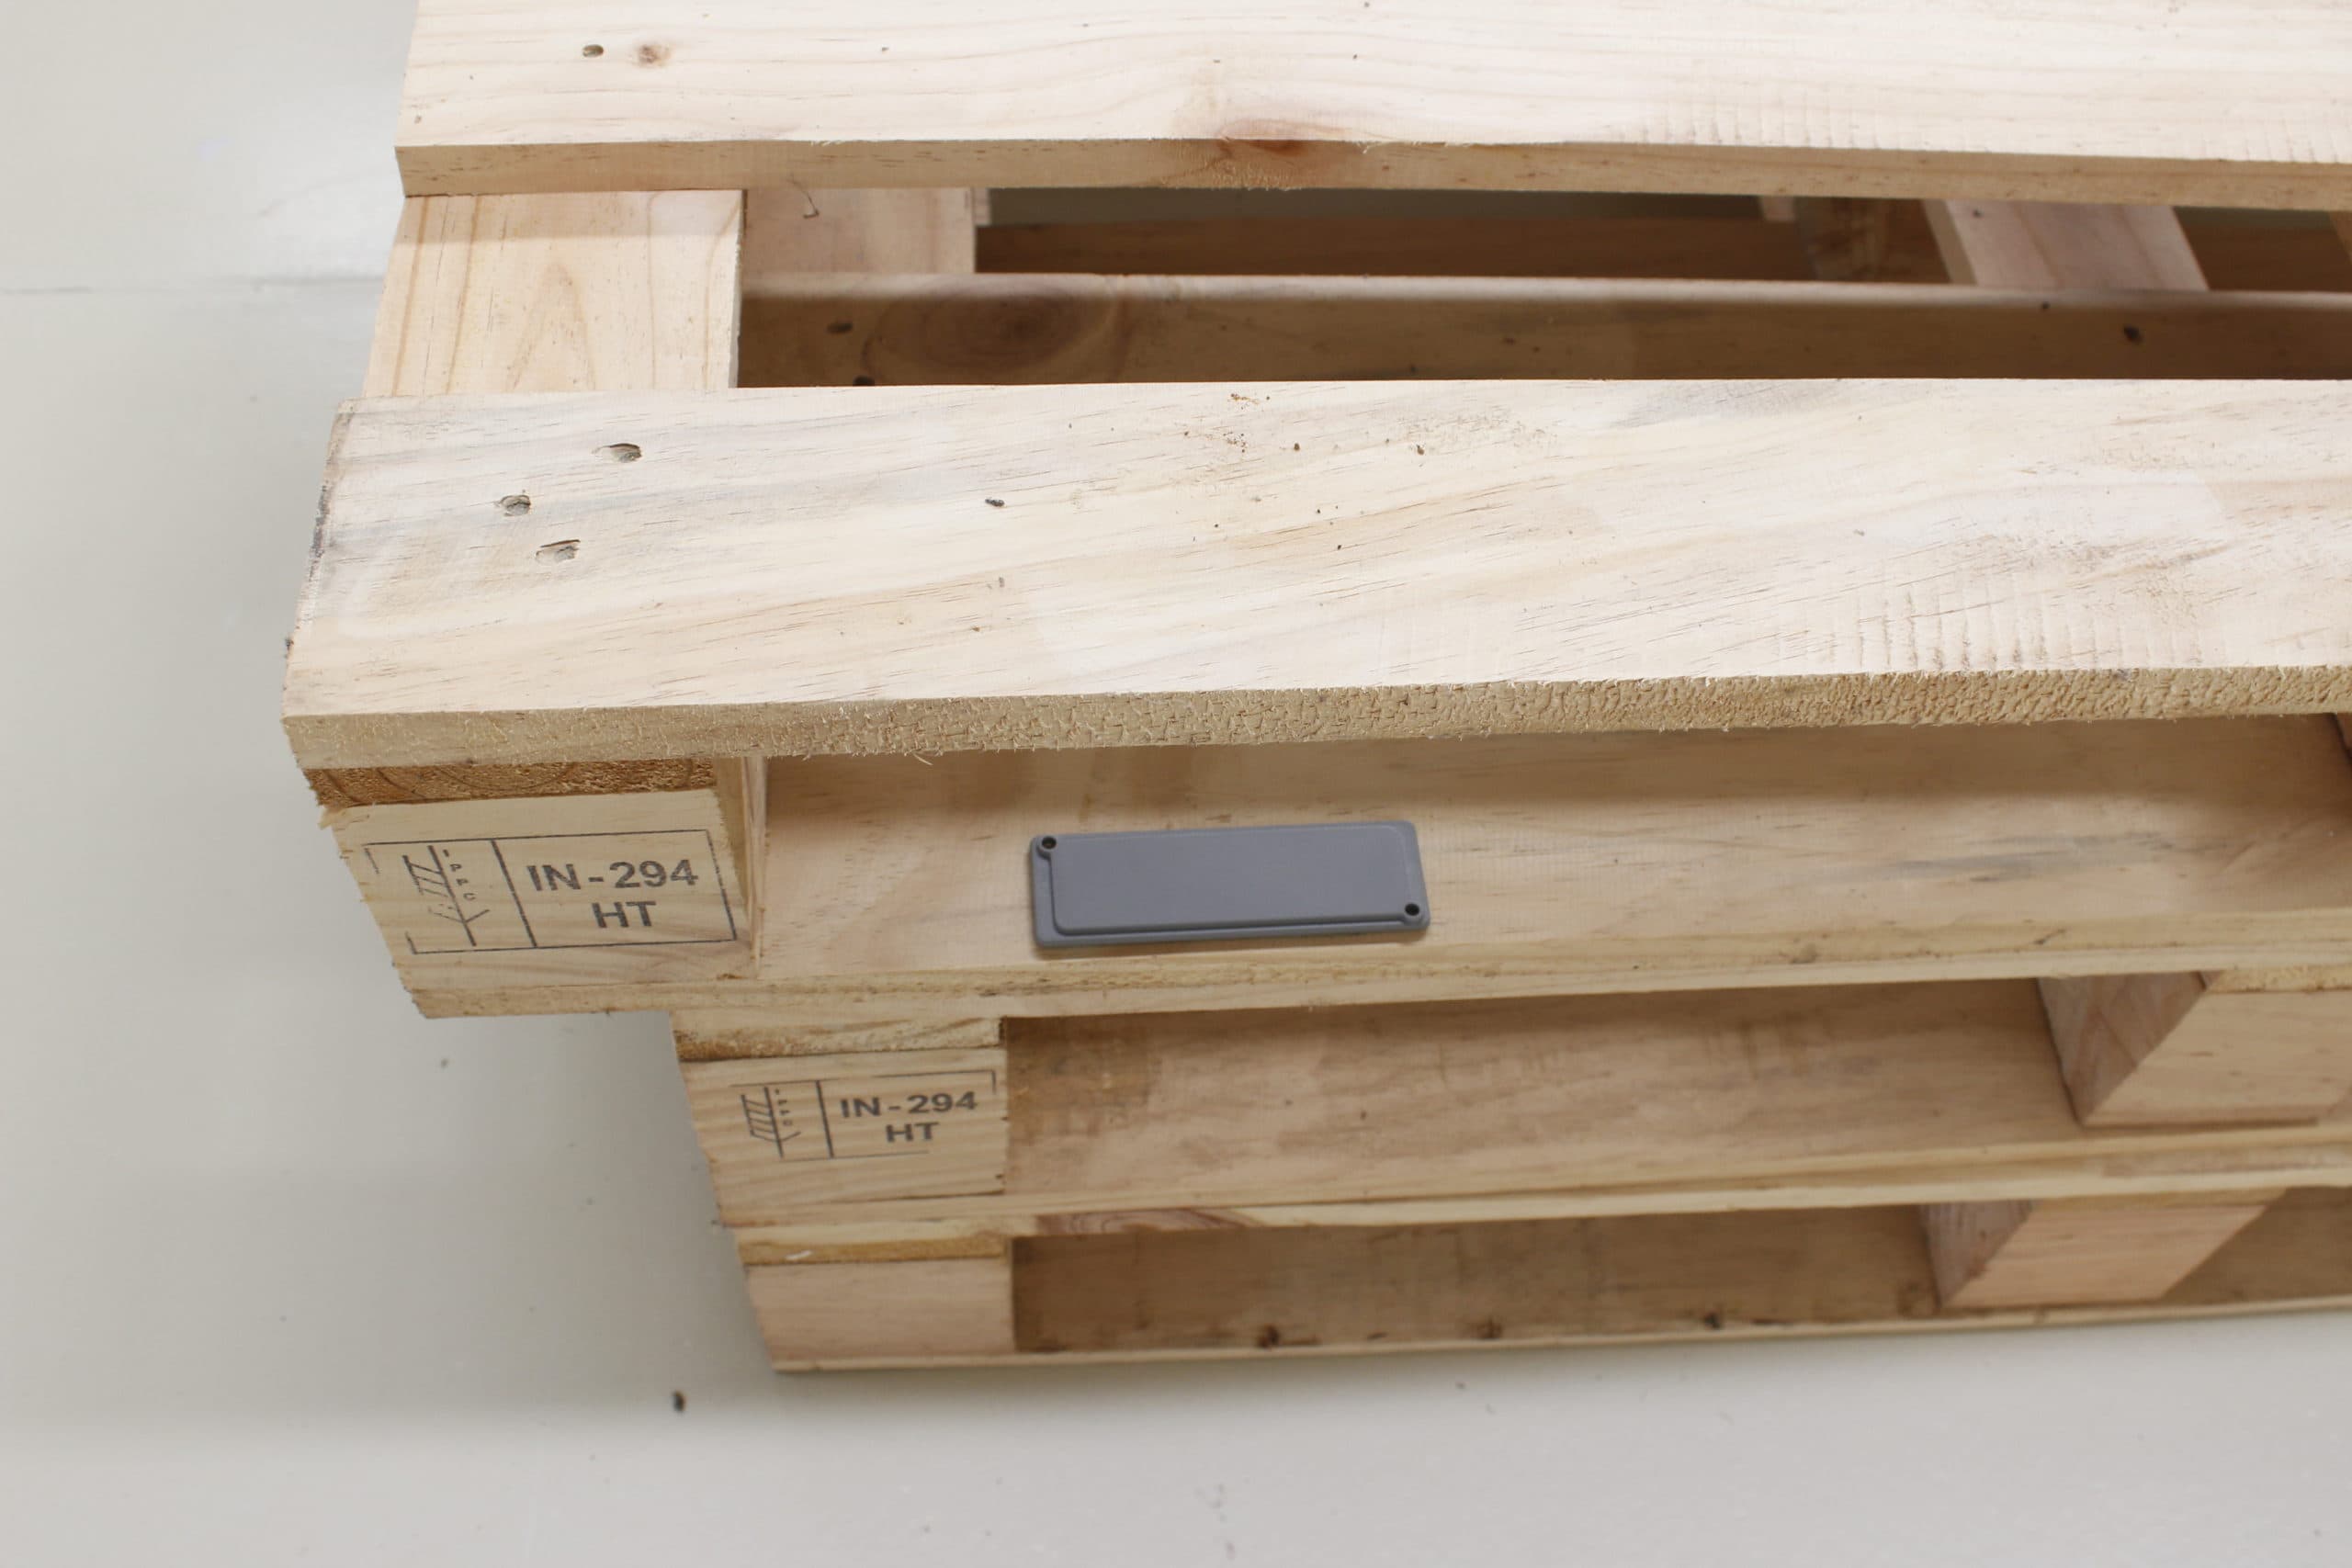 Wooden Pallet with RFID tags for industries and business tracking